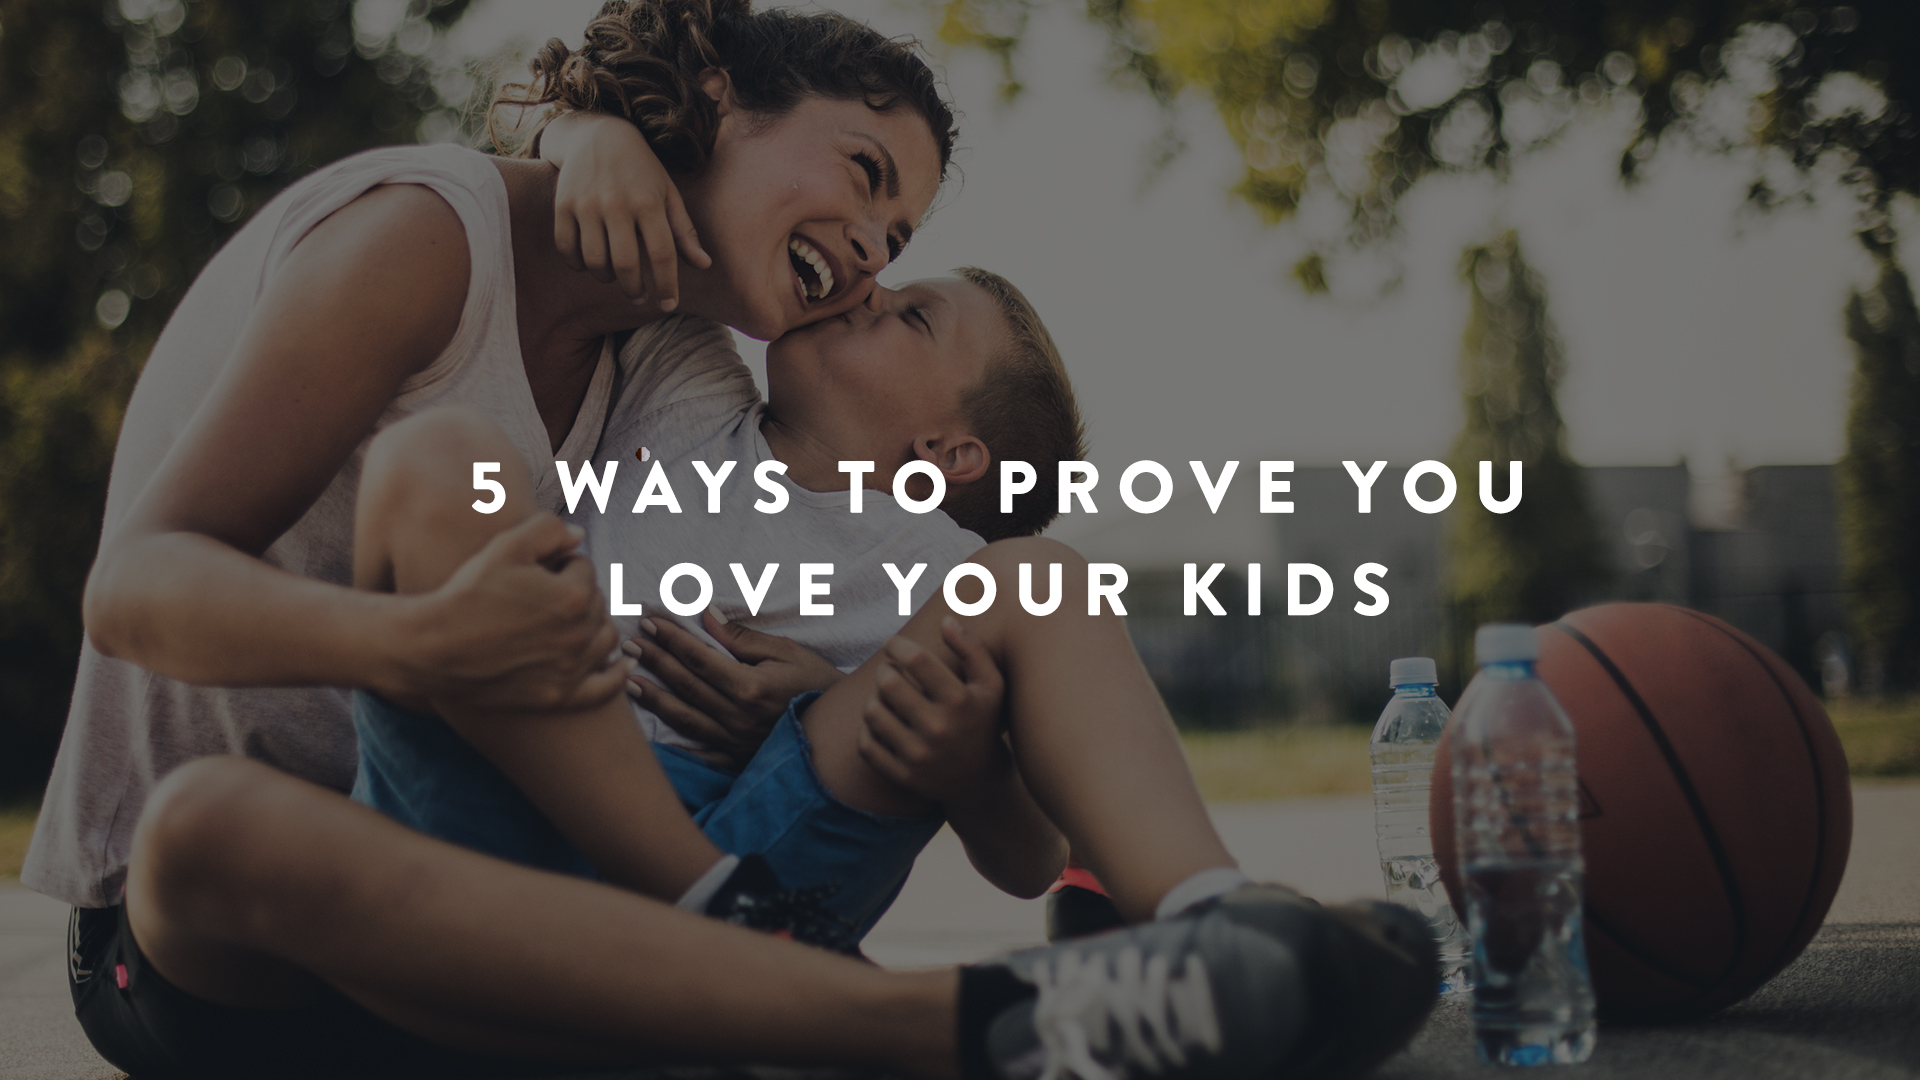 5 Ways to Prove You Love Your Kids